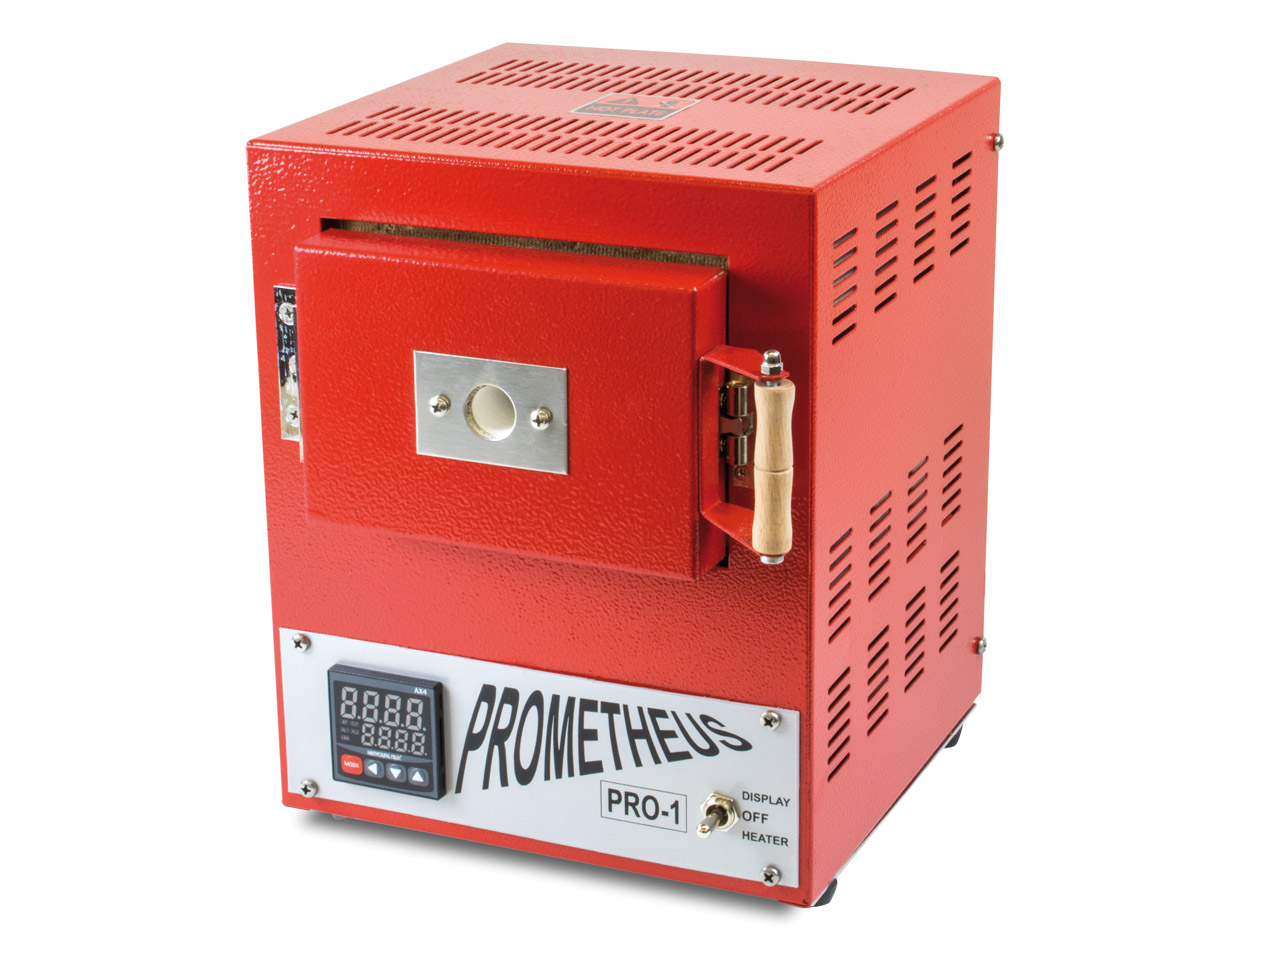 Do you have instructions for Prometheus Mini Kiln PRO-1 With Digital Controller?